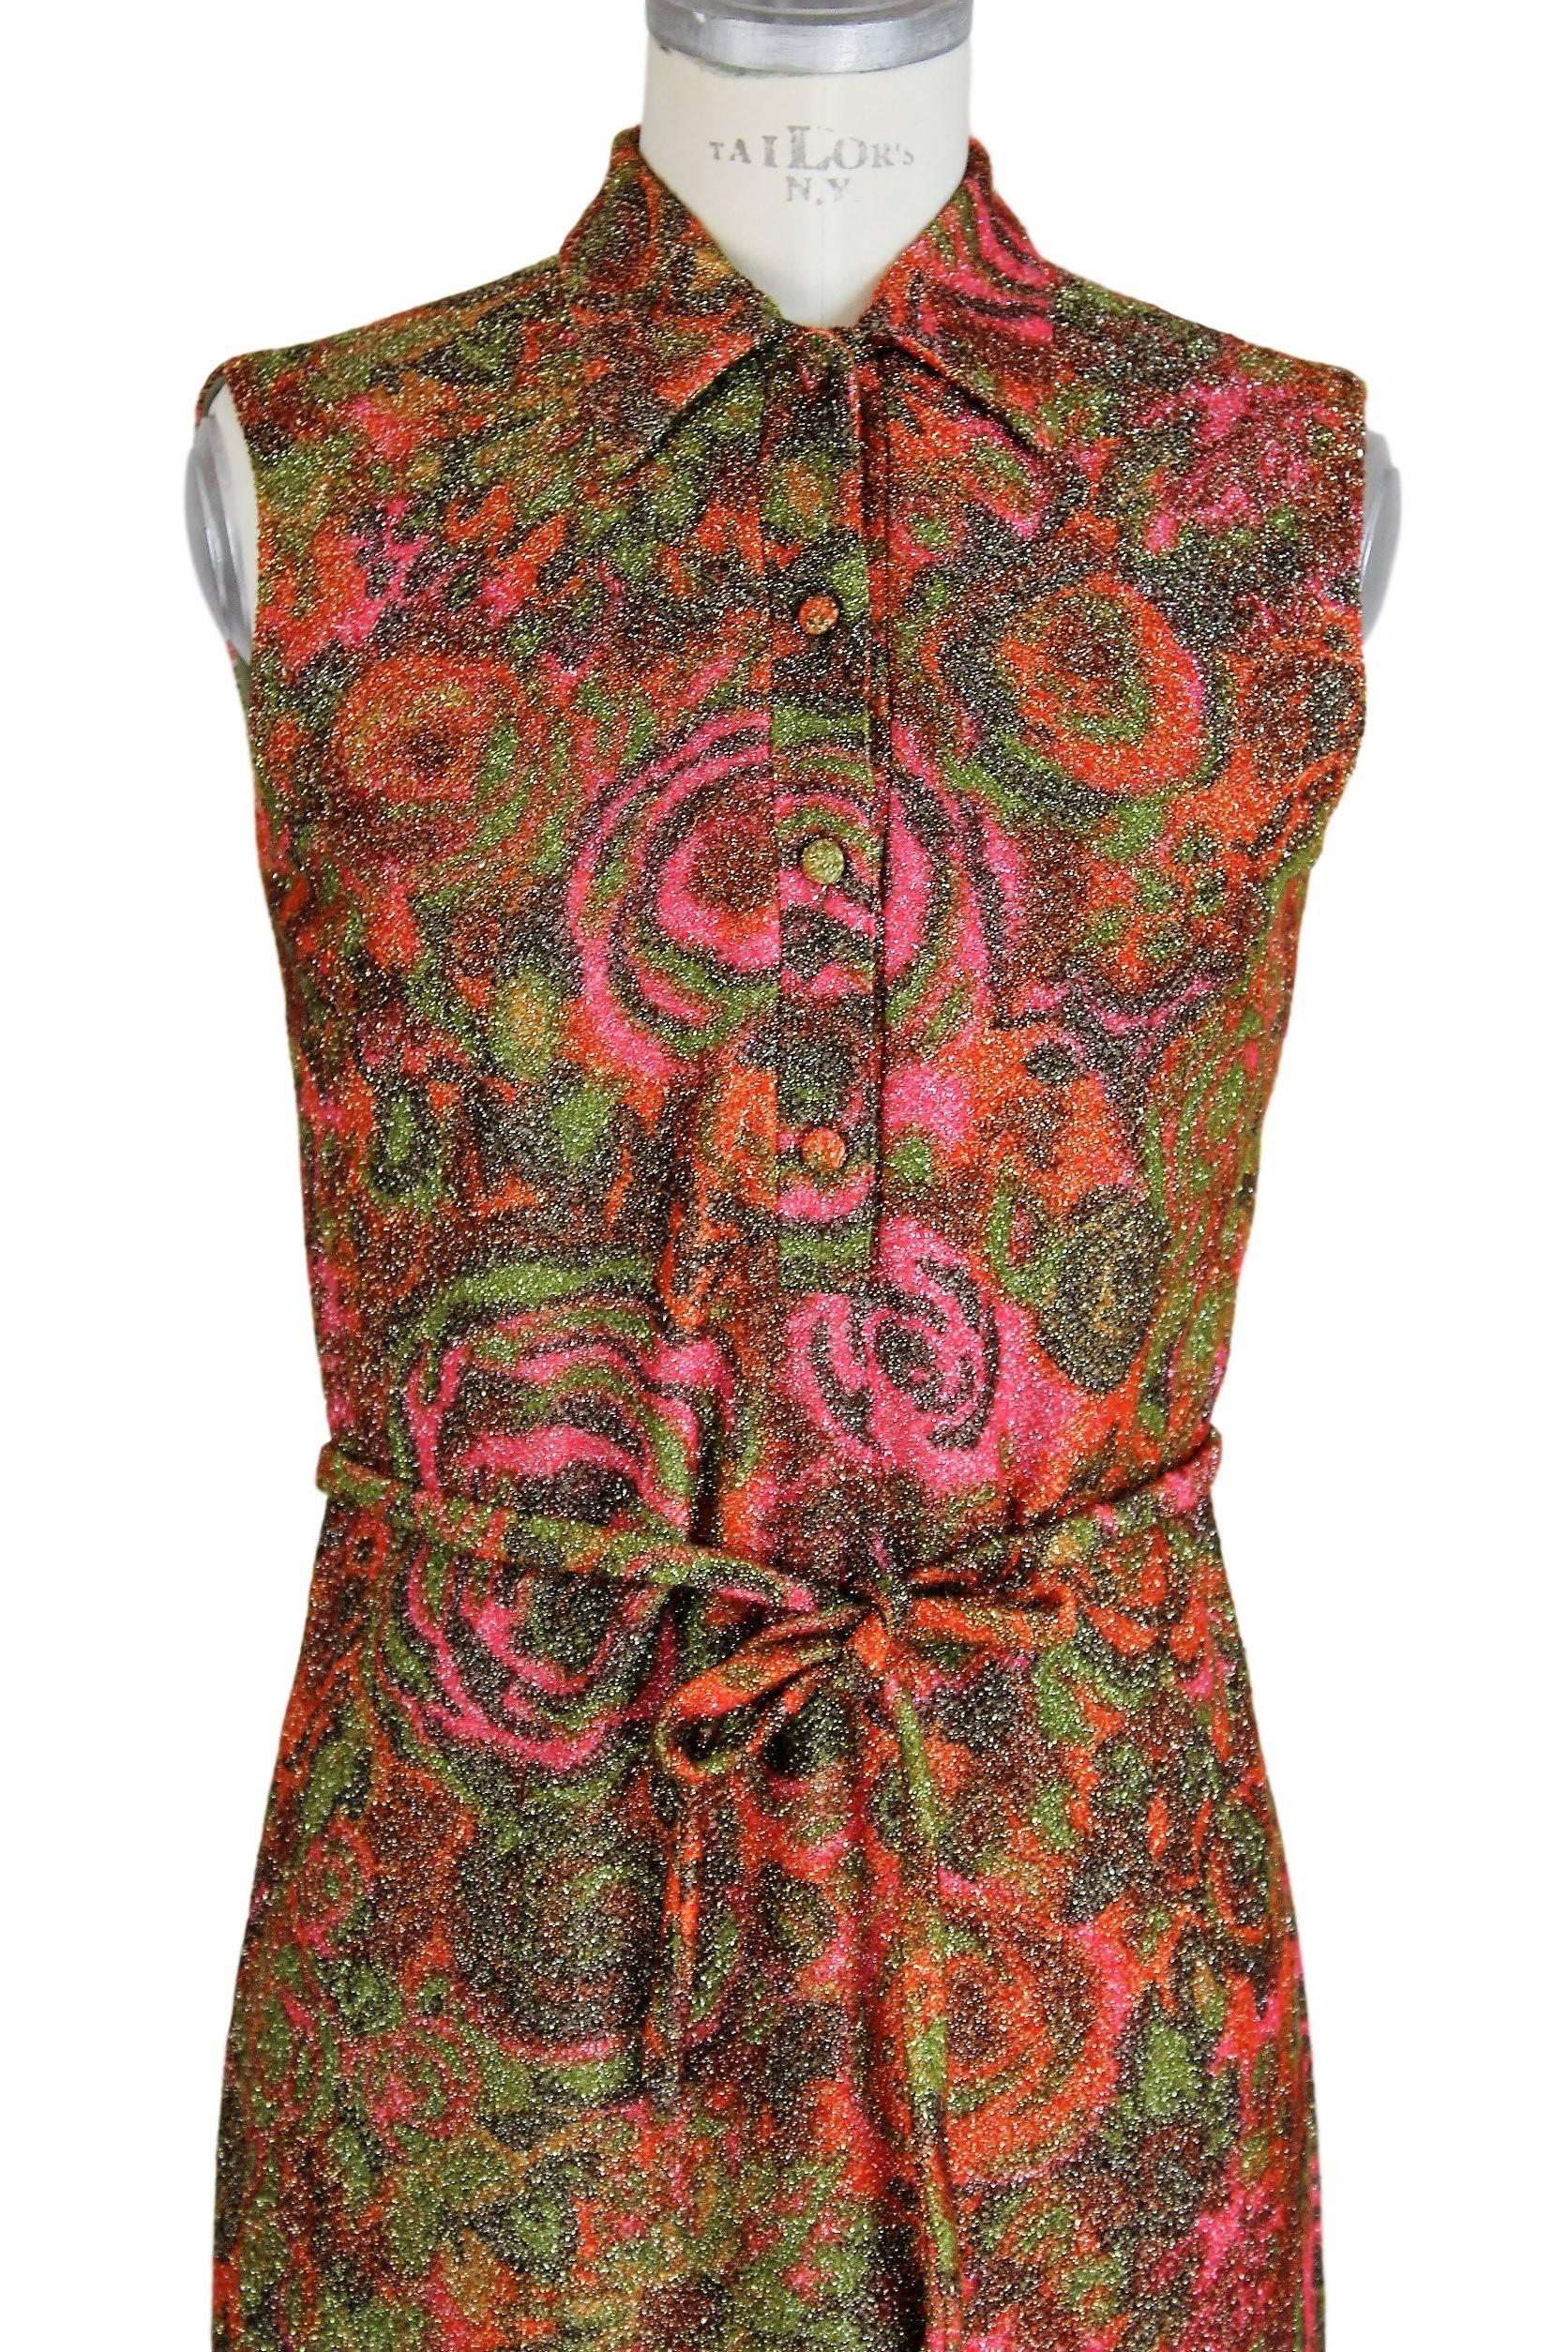 Sorelle Fontana gleaming metallic floral red wool sleeveless dress, 1960s  In Excellent Condition For Sale In Brindisi, IT